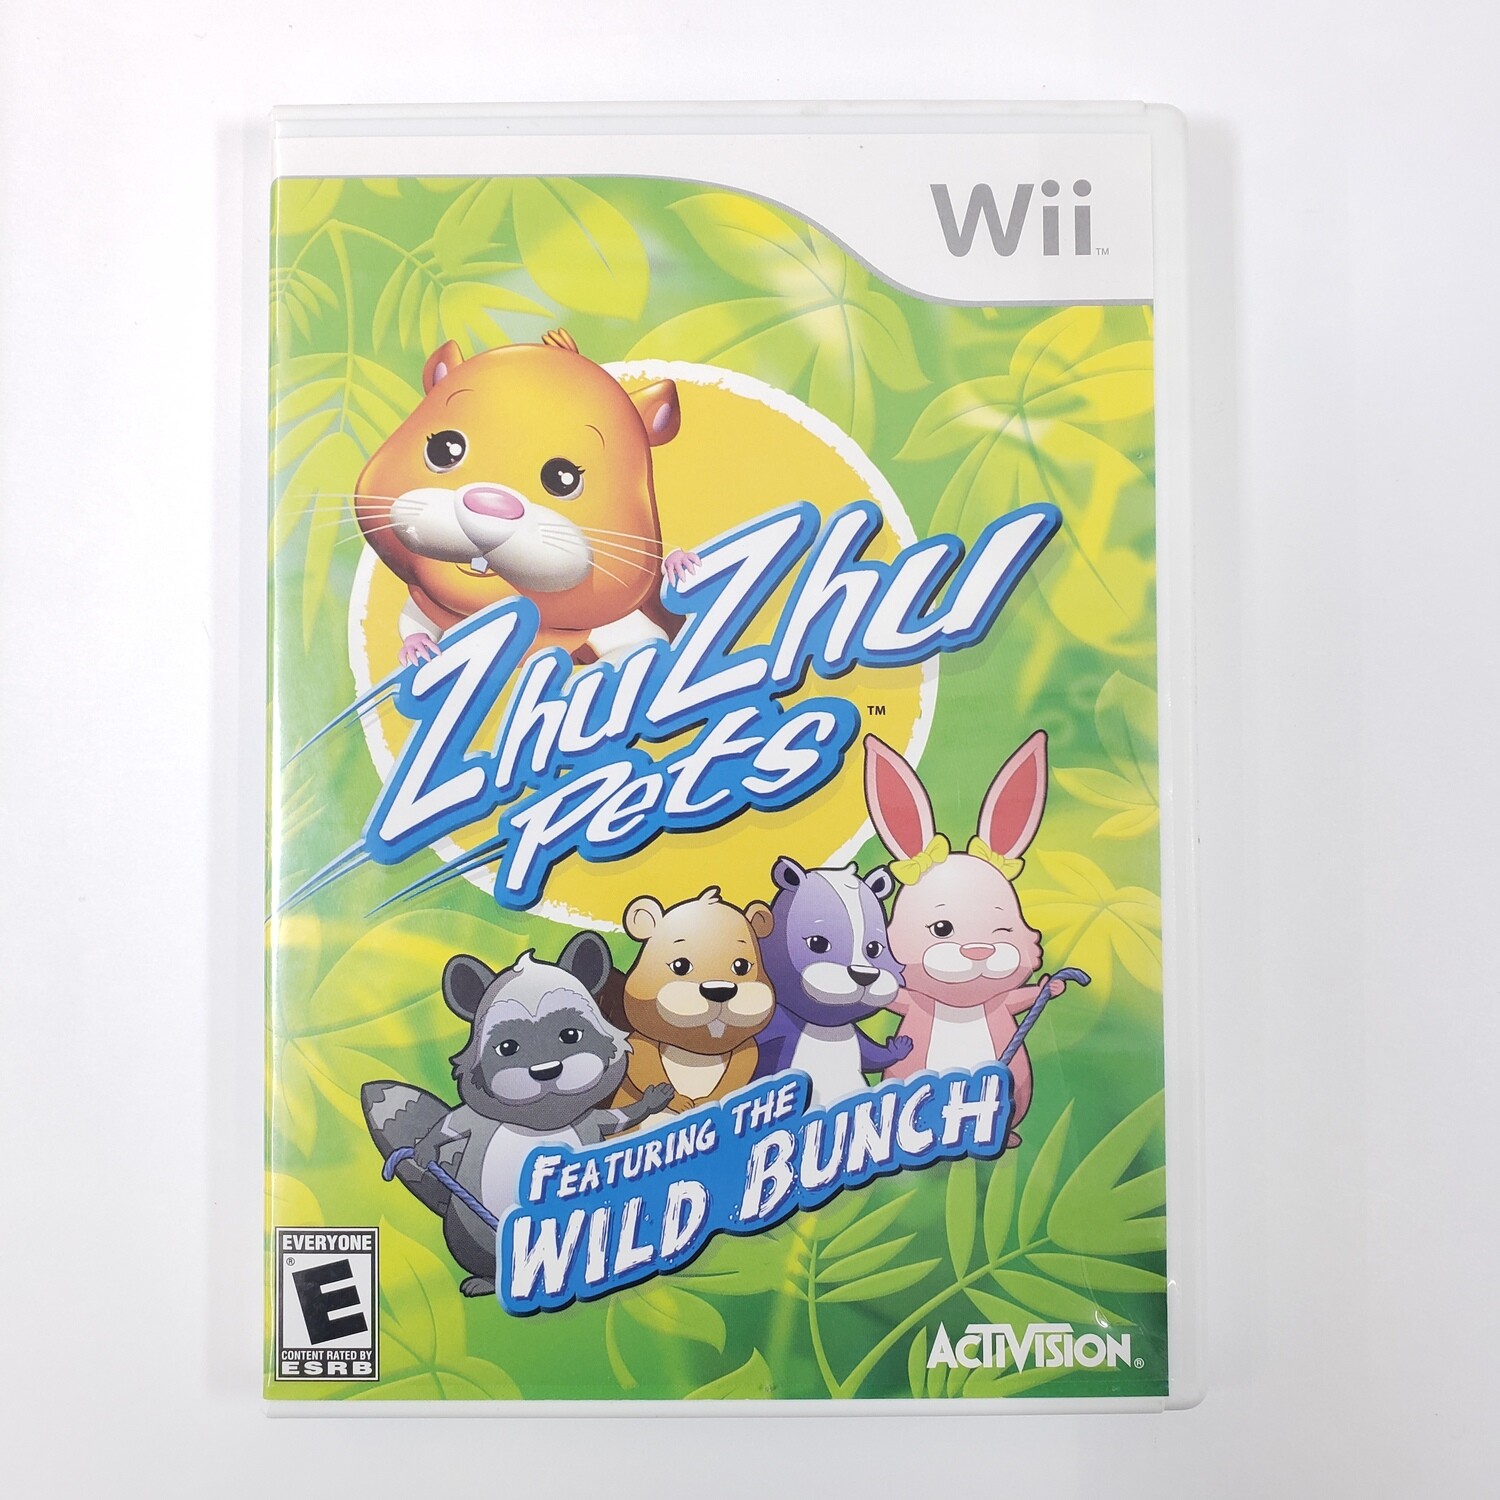 ZhuZhu Pets Featuring the Wild Bunch Video Game for Wii - CIB - Used